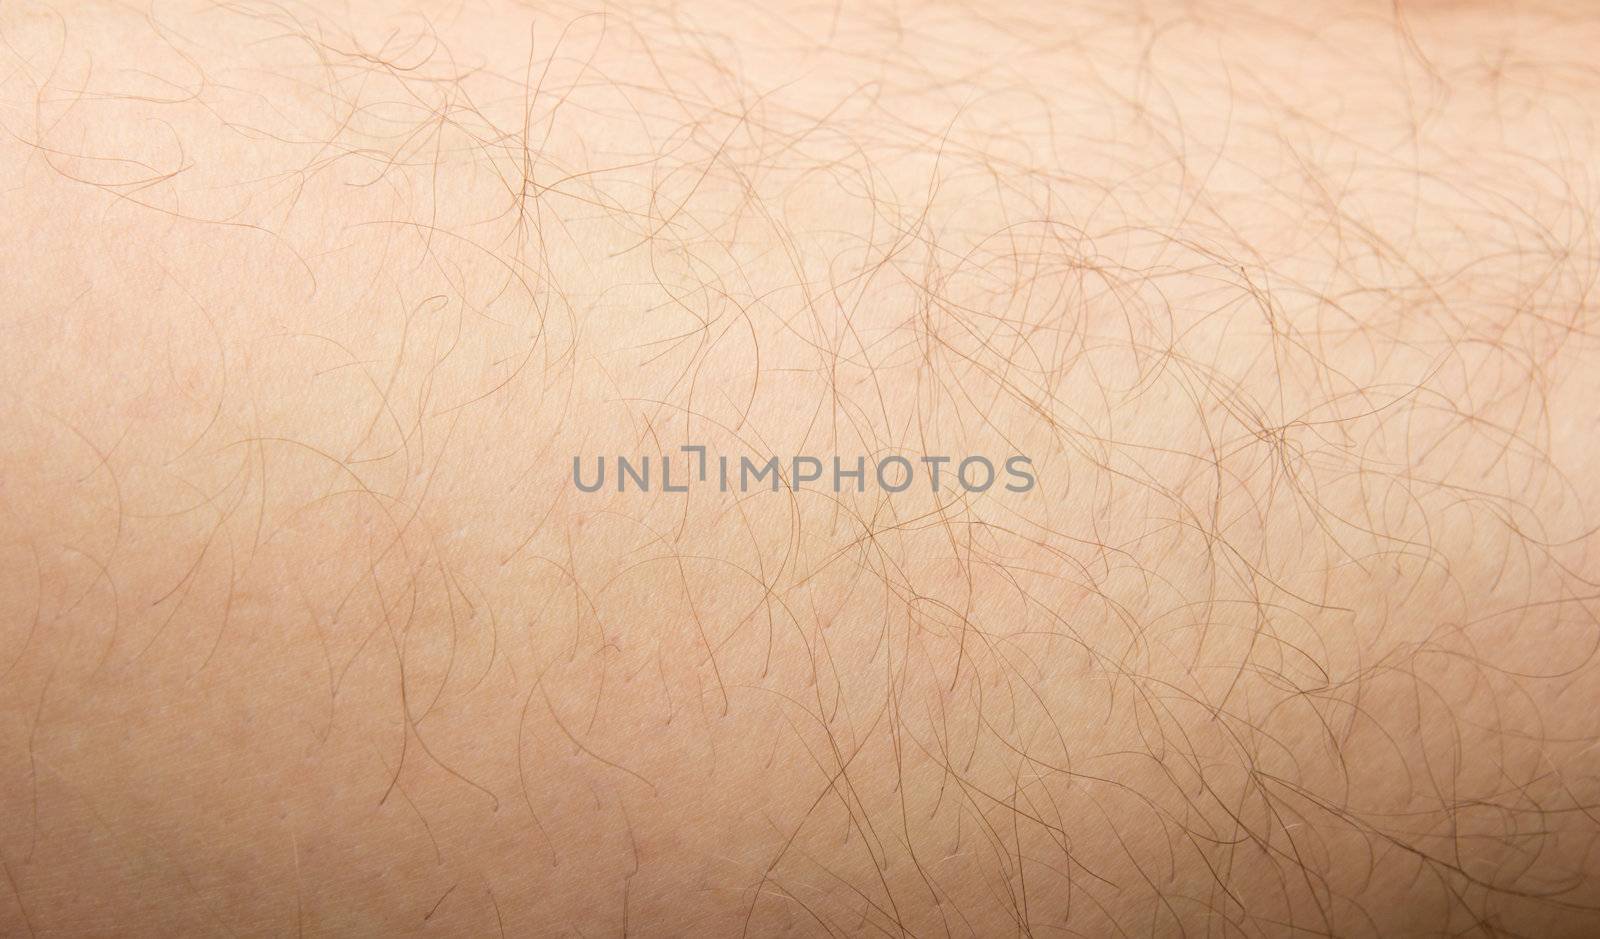 hairy skin as the background